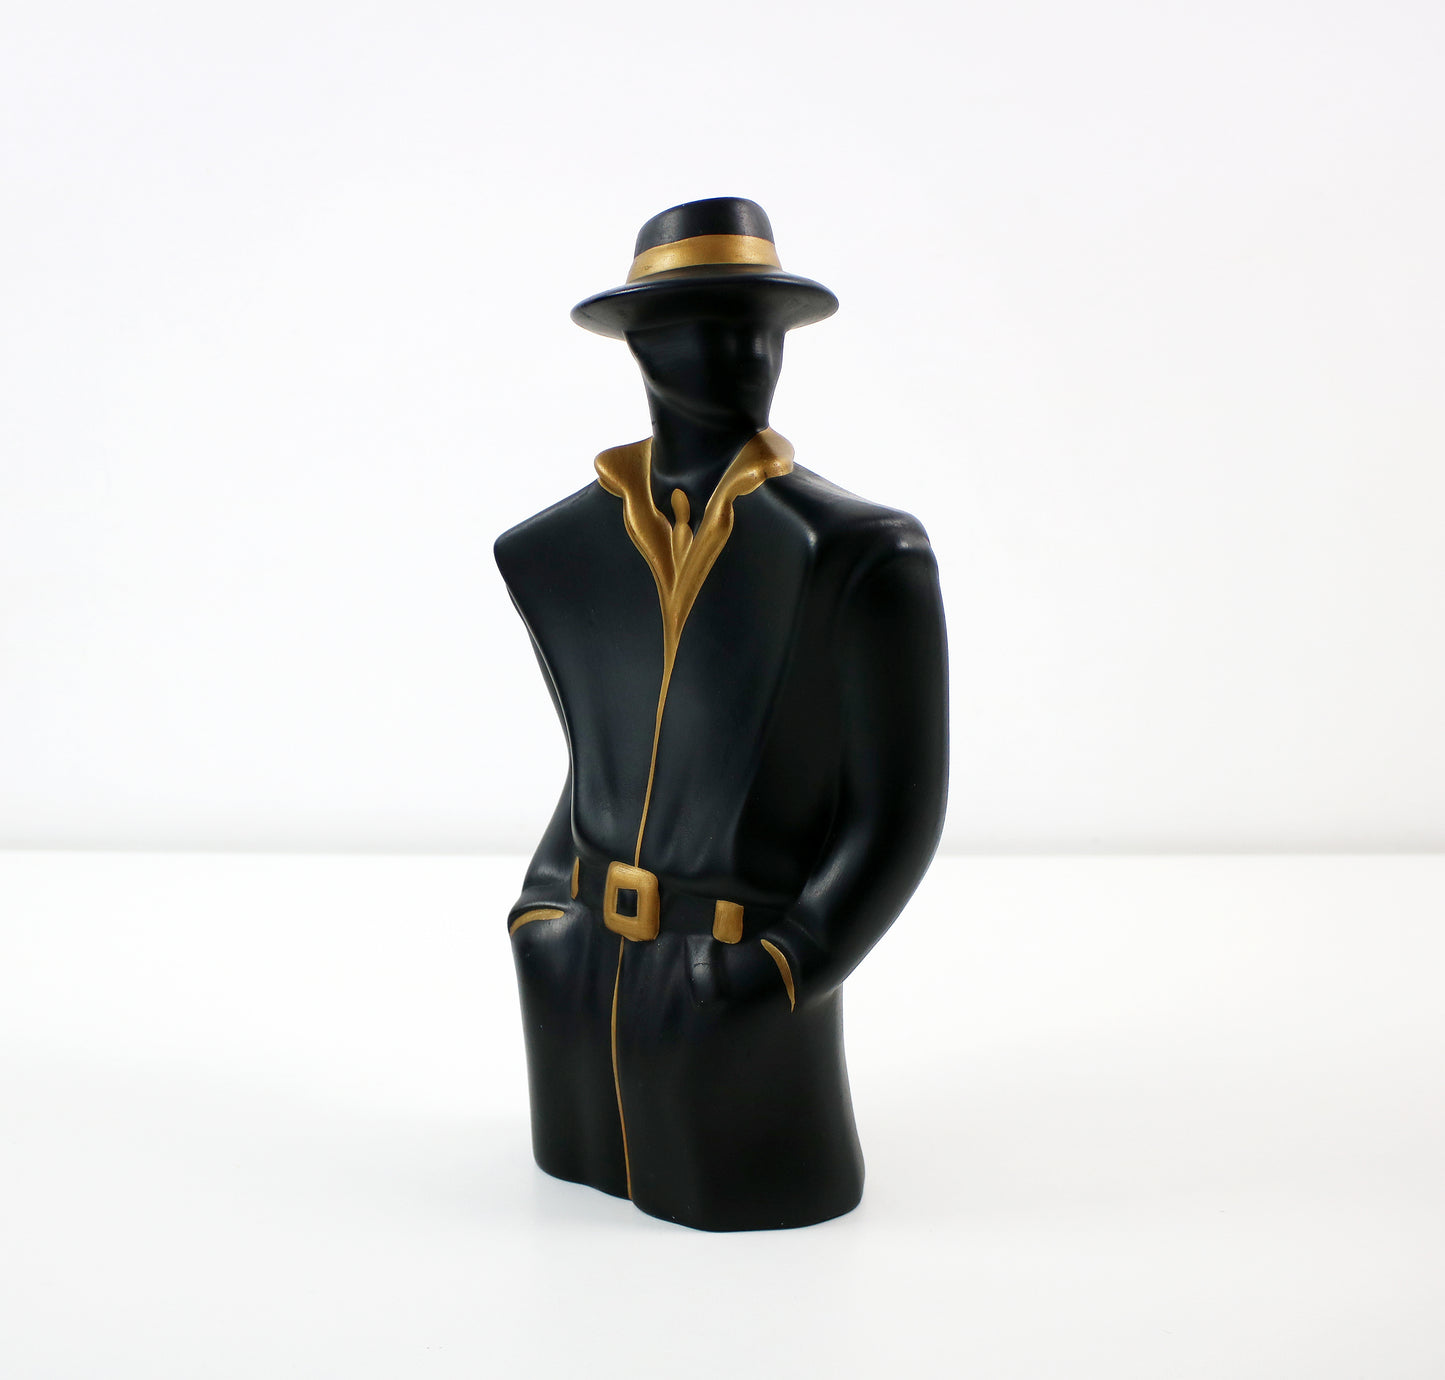 Male figurine with hat in black and gold 1980s post modern art deco revival